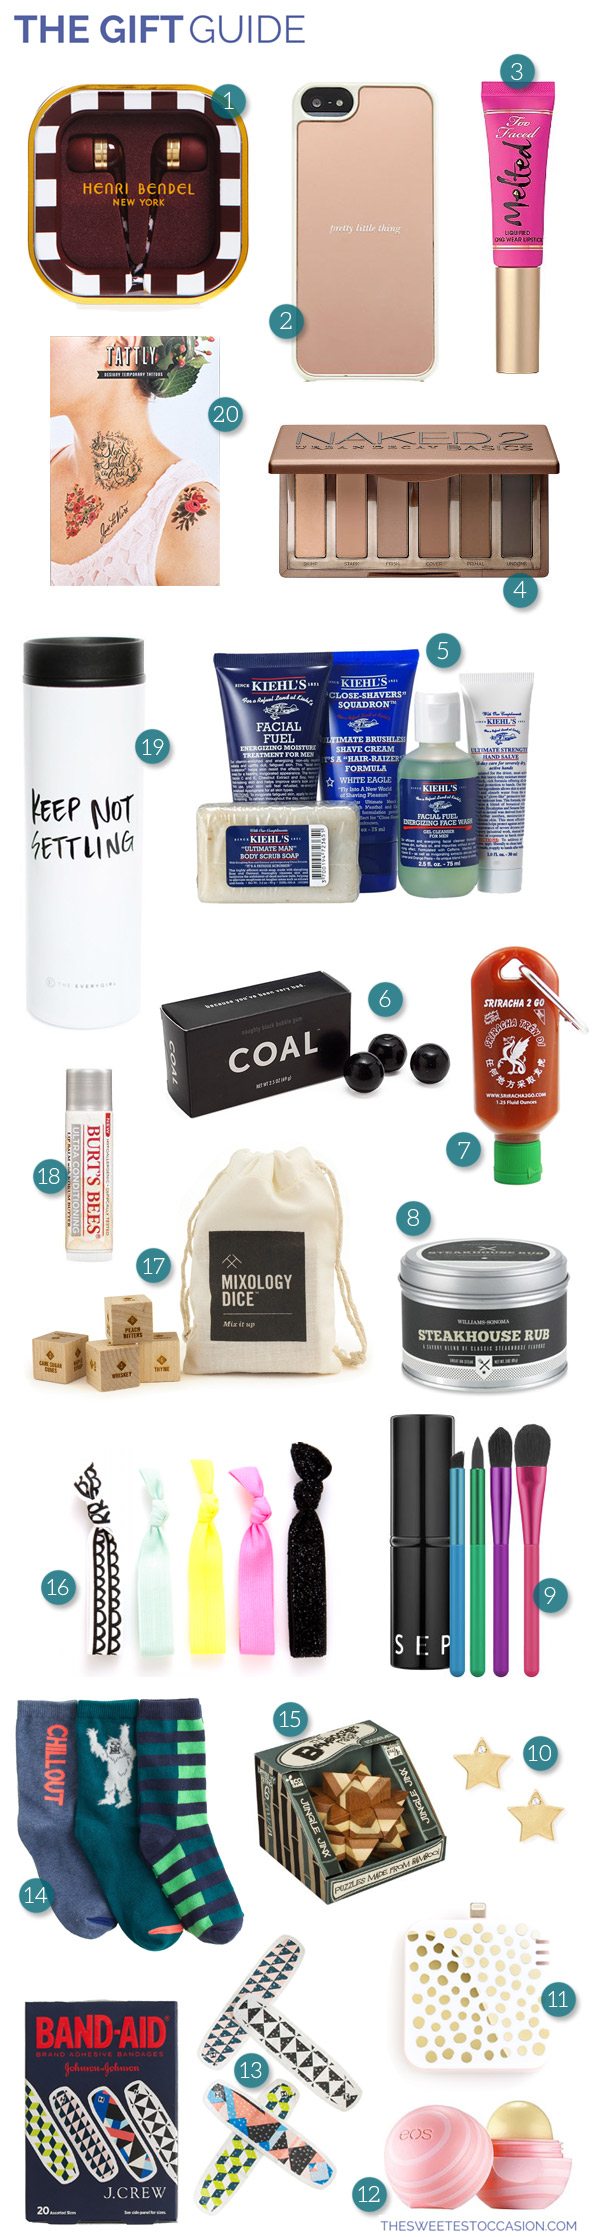 The Gift Guide: Stocking Stuffers from @cydconverse